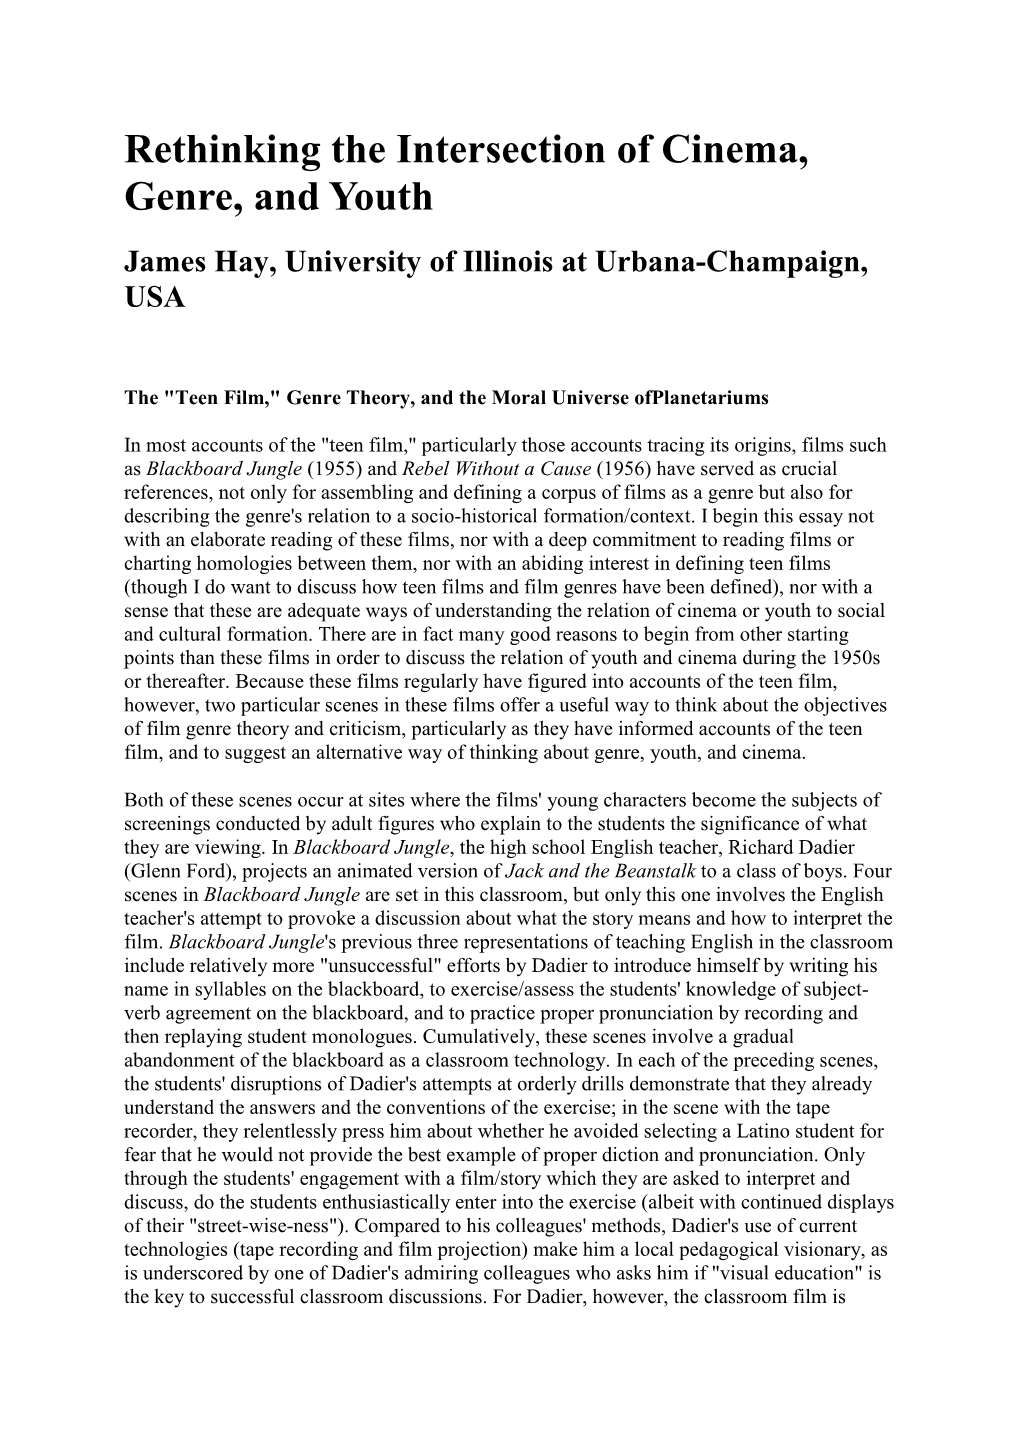 Rethinking the Intersection of Cinema, Genre, and Youth James Hay, University of Illinois at Urbana-Champaign, USA